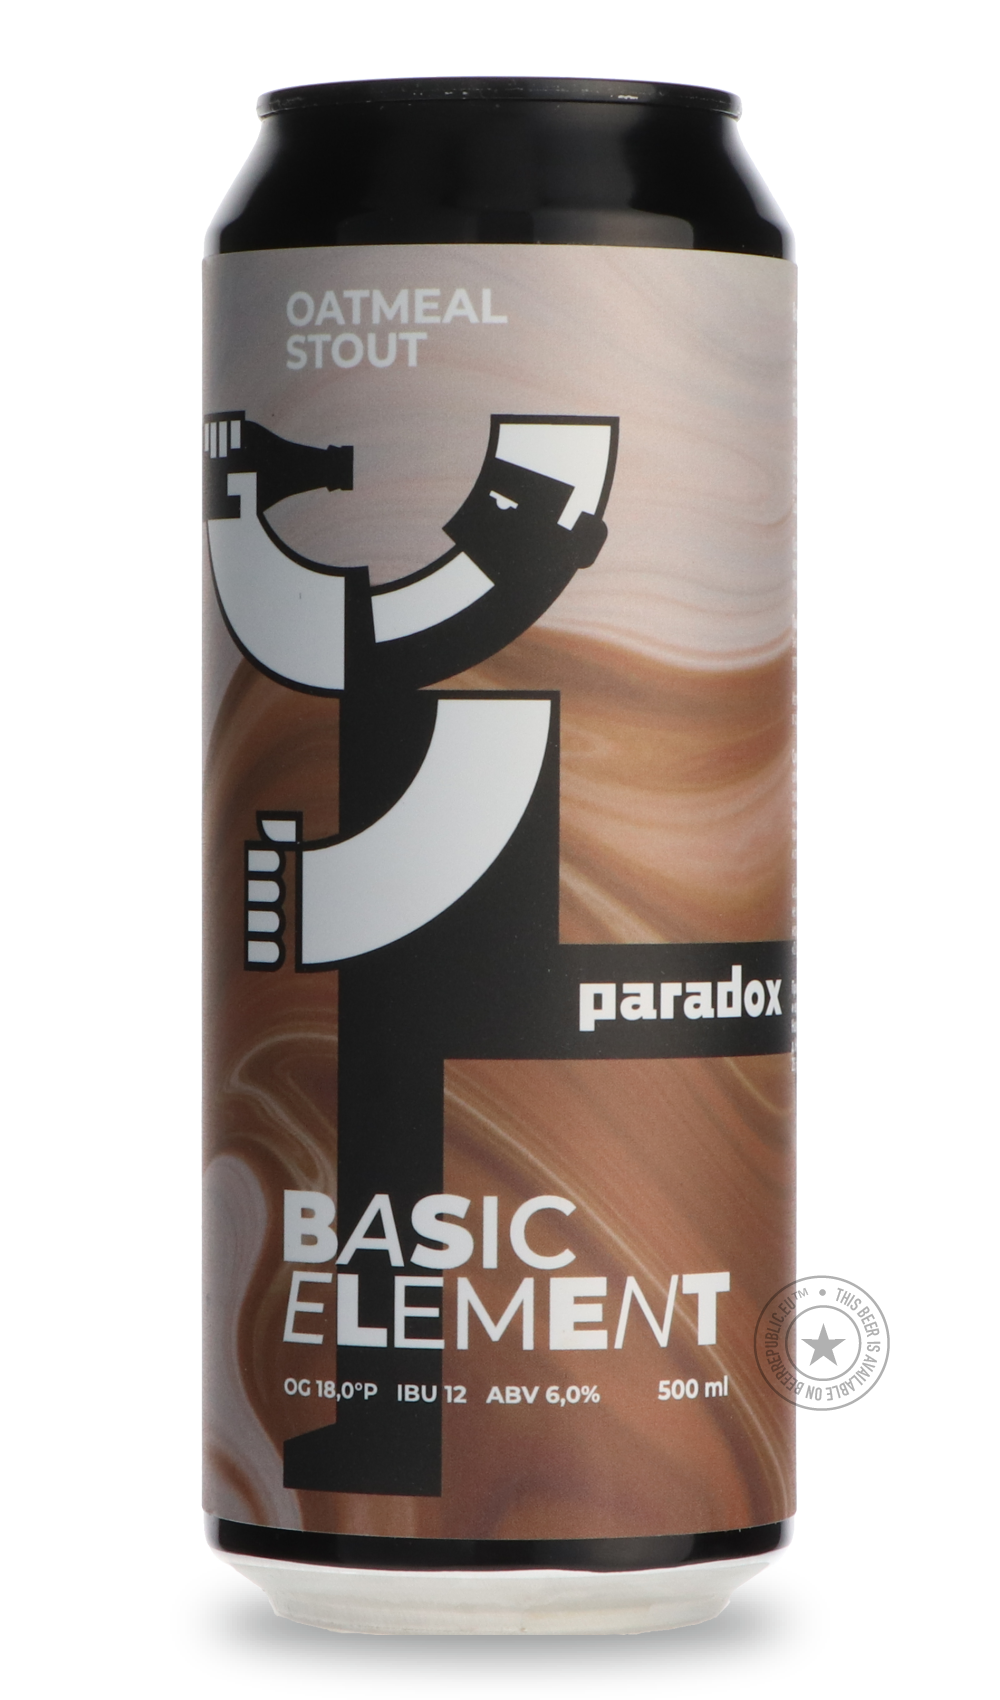 -Paradox- Basic Element: Oatmeal Stout-Stout & Porter- Only @ Beer Republic - The best online beer store for American & Canadian craft beer - Buy beer online from the USA and Canada - Bier online kopen - Amerikaans bier kopen - Craft beer store - Craft beer kopen - Amerikanisch bier kaufen - Bier online kaufen - Acheter biere online - IPA - Stout - Porter - New England IPA - Hazy IPA - Imperial Stout - Barrel Aged - Barrel Aged Imperial Stout - Brown - Dark beer - Blond - Blonde - Pilsner - Lager - Wheat - 